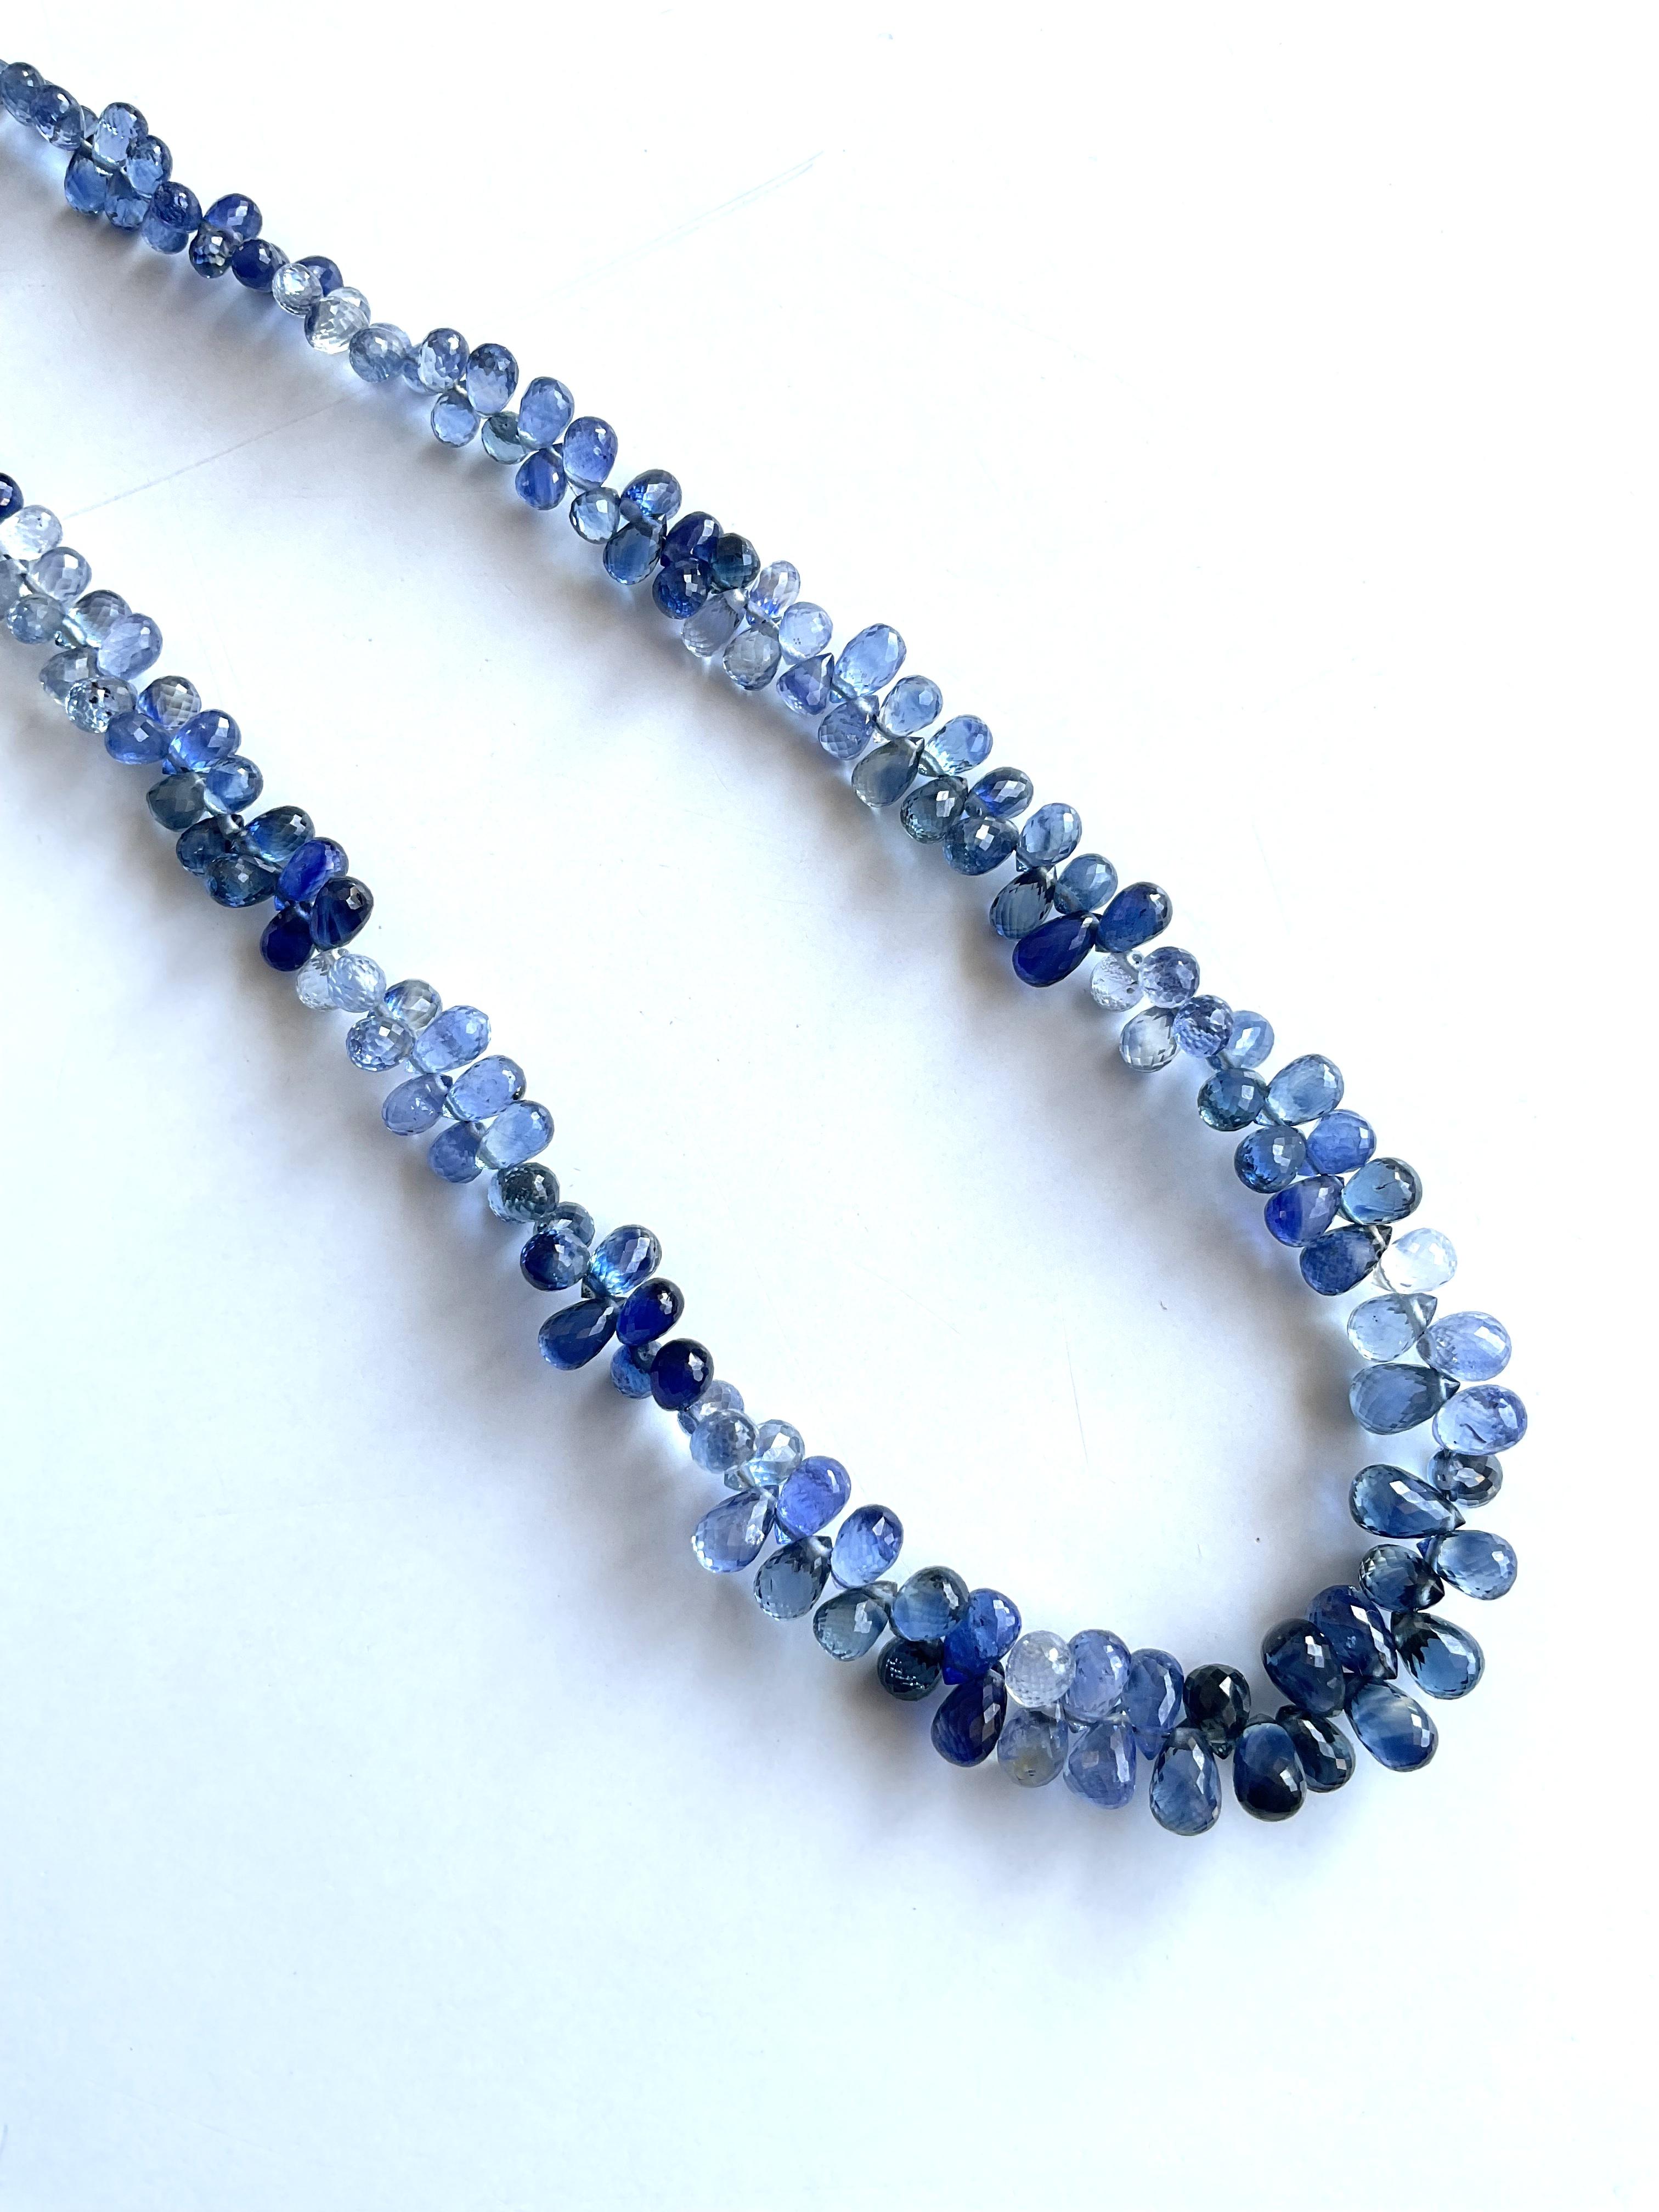 Bead 80.00 Carats Blue Sapphire Drops Top Quality Natural Gemstone For Fine Jewelry For Sale